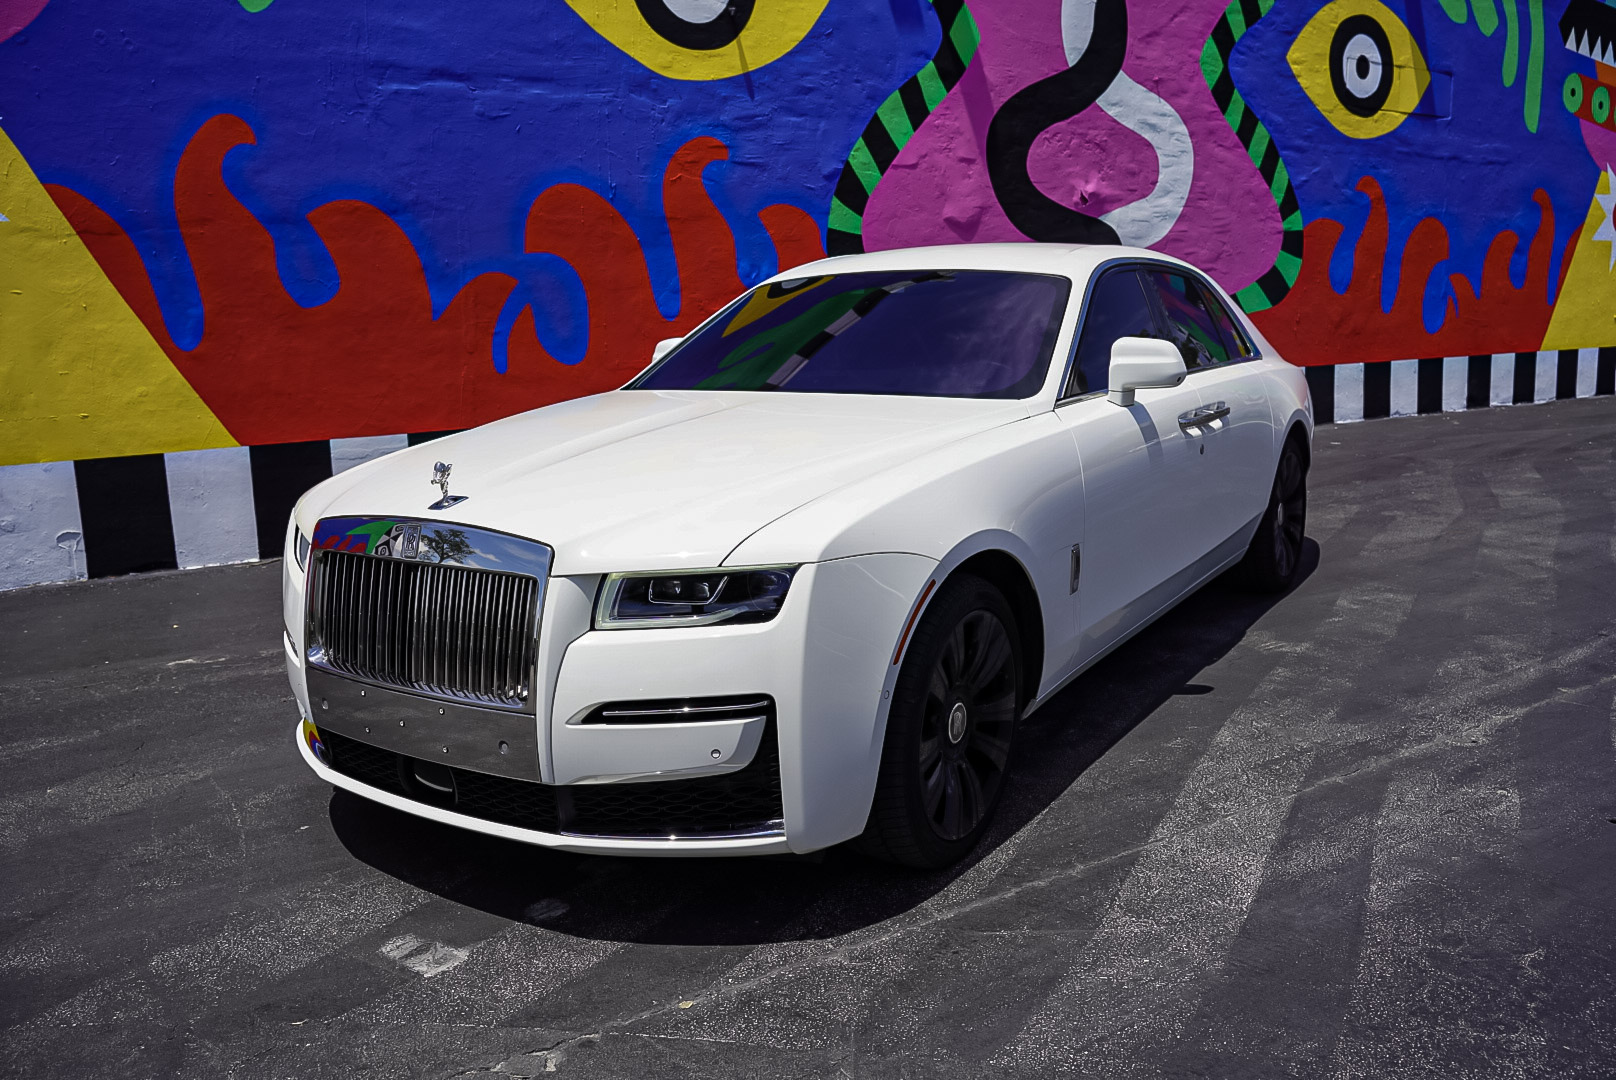 Rolls Royce Ghost White on Red exotic rental cars yacht charters Miami